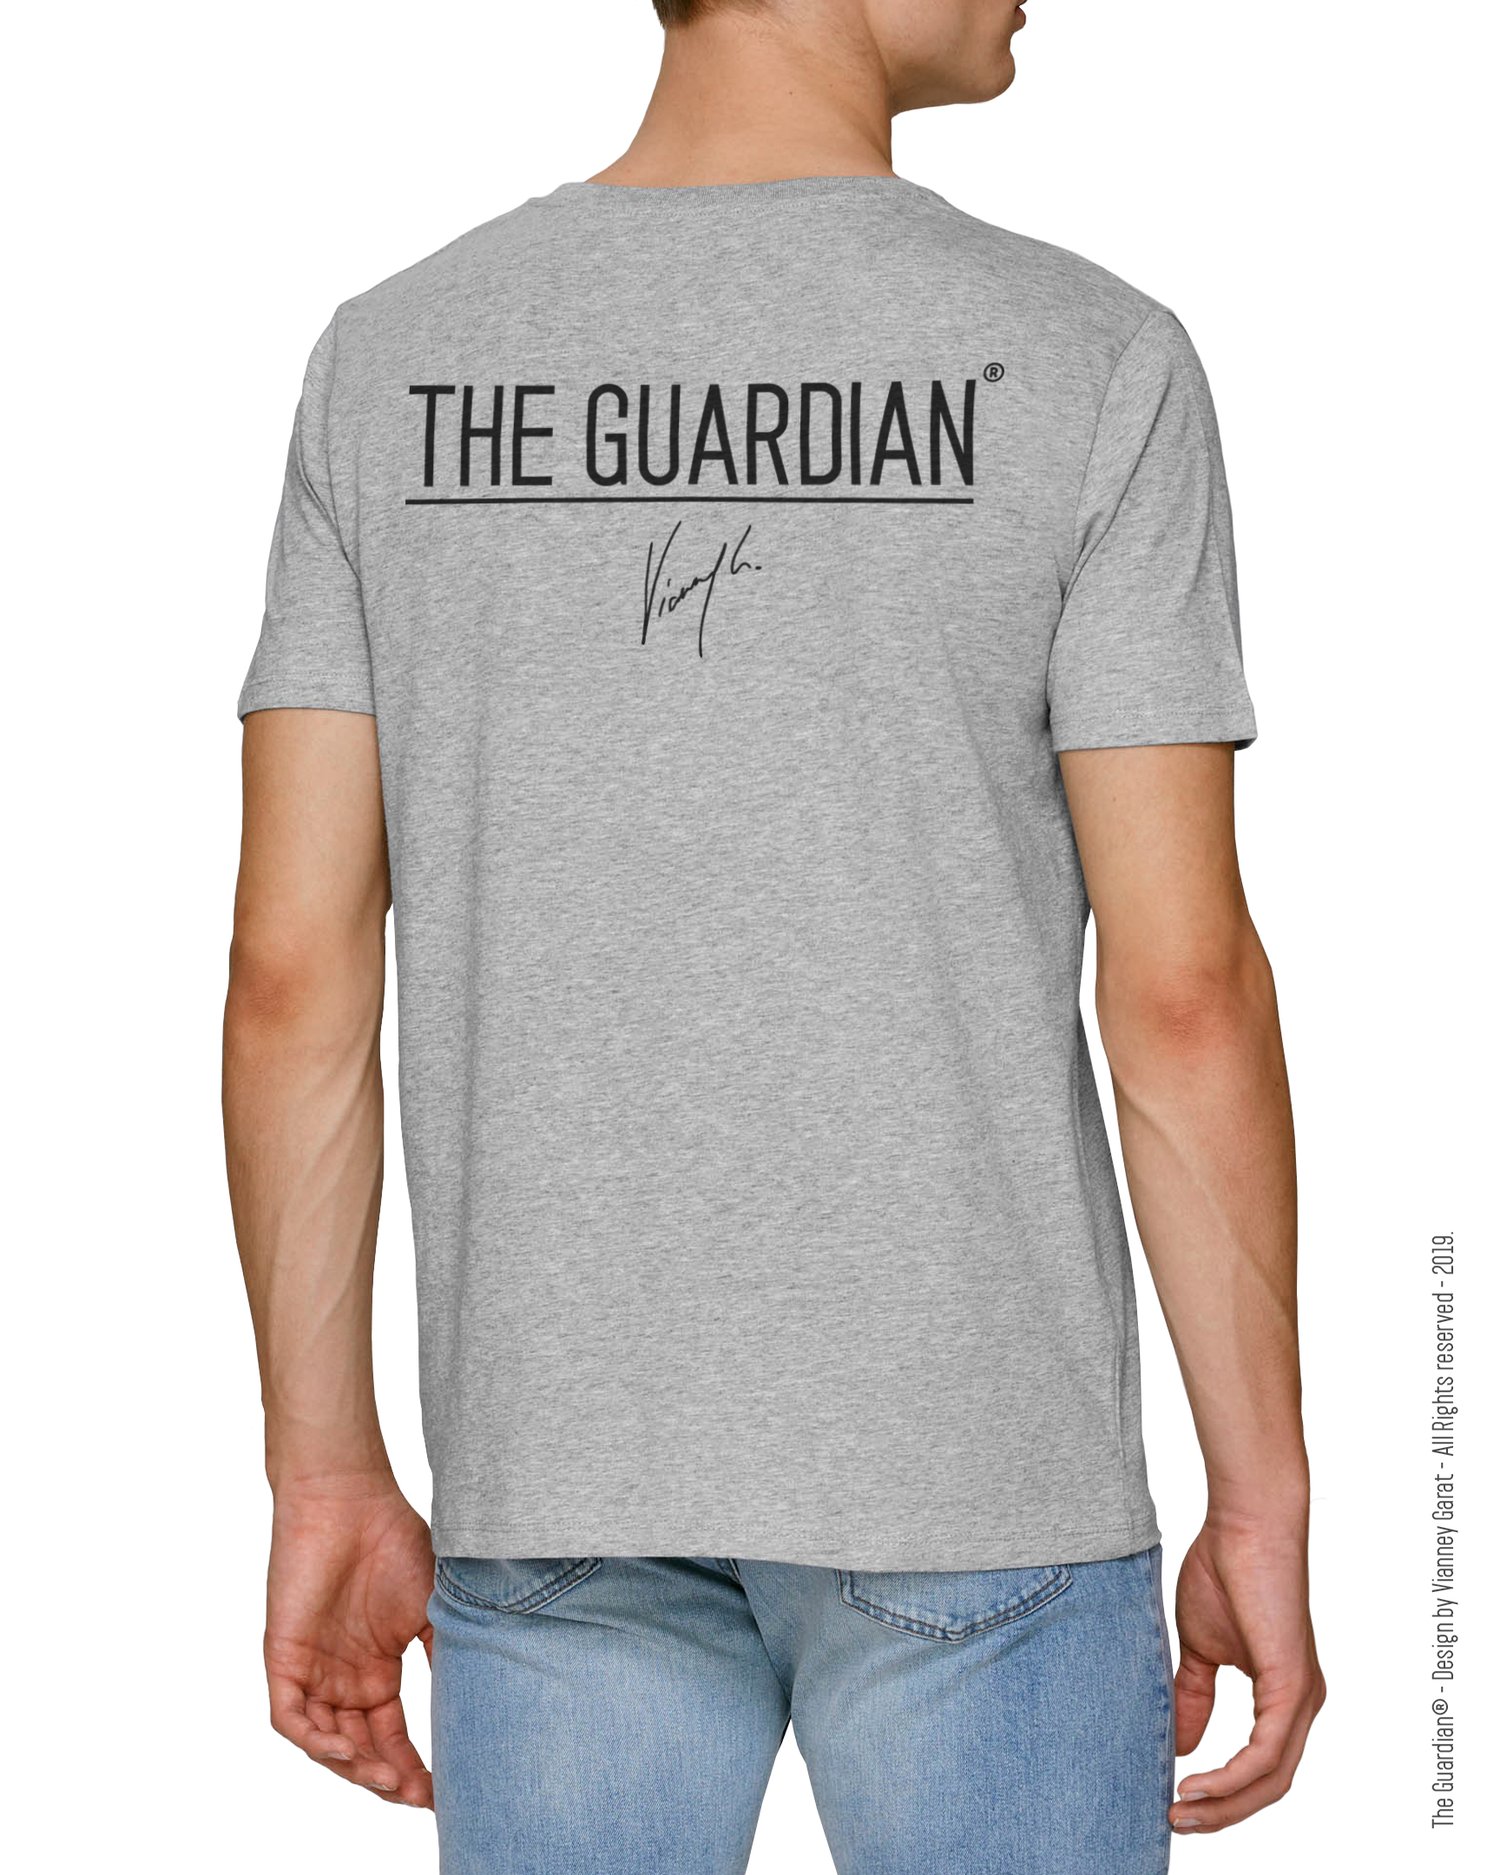 Image of T-Shirt The Guardian® Light Grey Edition